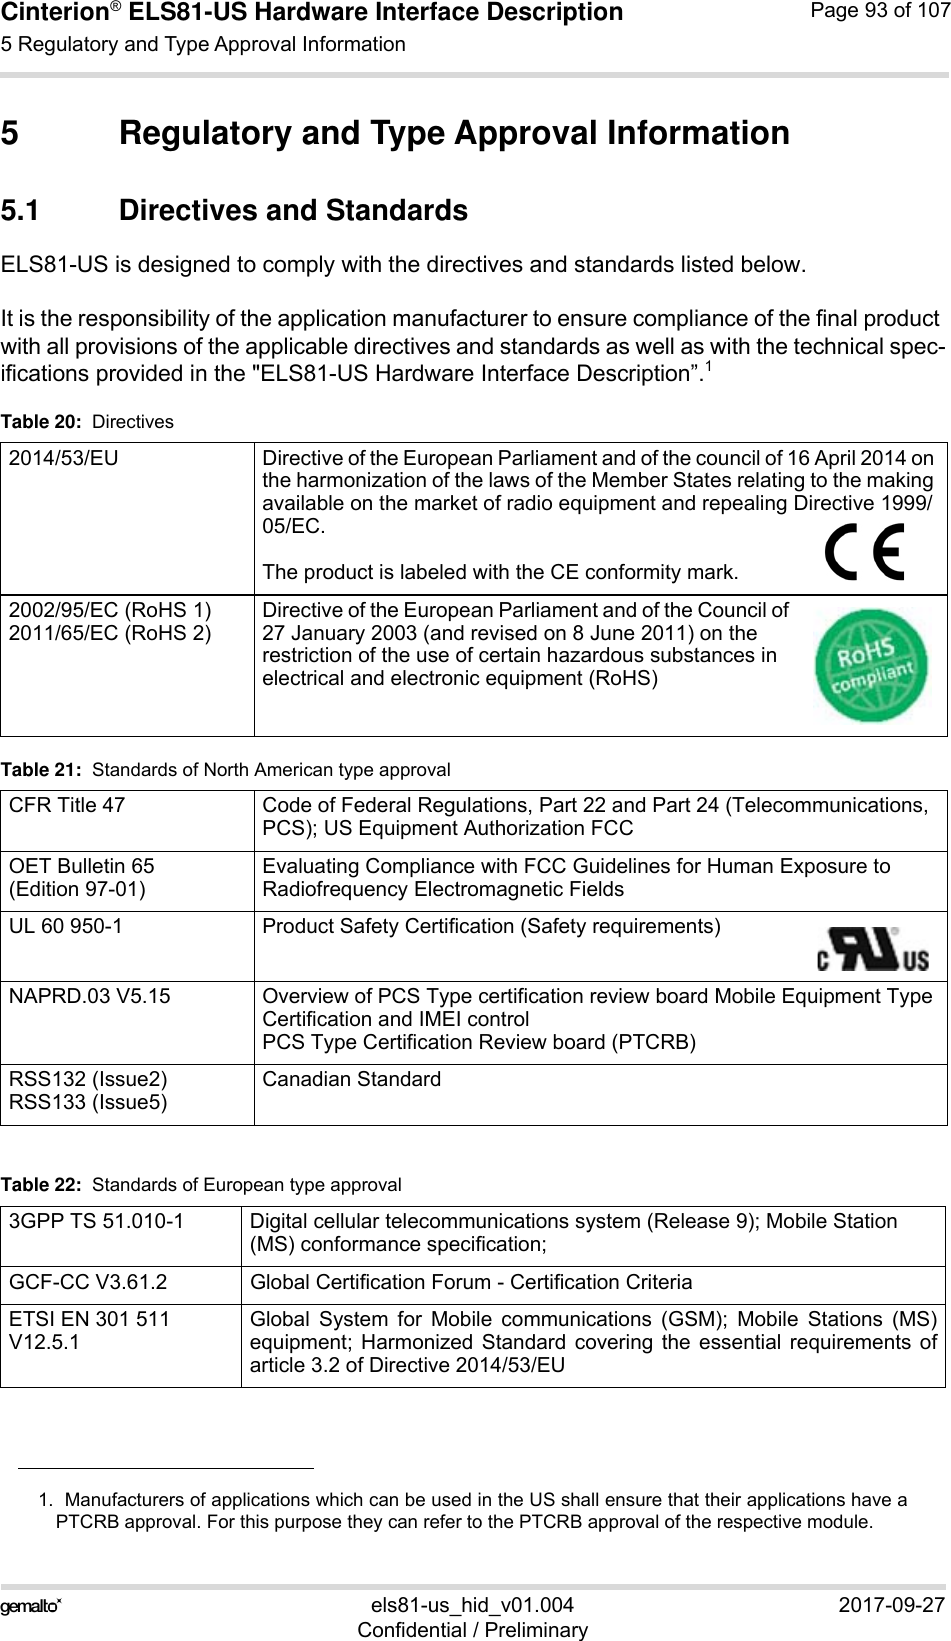 Cinterion® ELS81-US Hardware Interface Description5 Regulatory and Type Approval Information99els81-us_hid_v01.004 2017-09-27Confidential / PreliminaryPage 93 of 1075 Regulatory and Type Approval Information5.1 Directives and StandardsELS81-US is designed to comply with the directives and standards listed below.It is the responsibility of the application manufacturer to ensure compliance of the final product with all provisions of the applicable directives and standards as well as with the technical spec-ifications provided in the &quot;ELS81-US Hardware Interface Description”.11.  Manufacturers of applications which can be used in the US shall ensure that their applications have aPTCRB approval. For this purpose they can refer to the PTCRB approval of the respective module. Table 20:  Directives2014/53/EU Directive of the European Parliament and of the council of 16 April 2014 on the harmonization of the laws of the Member States relating to the making available on the market of radio equipment and repealing Directive 1999/ 05/EC.The product is labeled with the CE conformity mark.2002/95/EC (RoHS 1)2011/65/EC (RoHS 2)Directive of the European Parliament and of the Council of 27 January 2003 (and revised on 8 June 2011) on the restriction of the use of certain hazardous substances in electrical and electronic equipment (RoHS)Table 21:  Standards of North American type approvalCFR Title 47 Code of Federal Regulations, Part 22 and Part 24 (Telecommunications, PCS); US Equipment Authorization FCCOET Bulletin 65 (Edition 97-01) Evaluating Compliance with FCC Guidelines for Human Exposure to Radiofrequency Electromagnetic FieldsUL 60 950-1 Product Safety Certification (Safety requirements)NAPRD.03 V5.15 Overview of PCS Type certification review board Mobile Equipment Type Certification and IMEI controlPCS Type Certification Review board (PTCRB)RSS132 (Issue2)RSS133 (Issue5)Canadian StandardTable 22:  Standards of European type approval3GPP TS 51.010-1 Digital cellular telecommunications system (Release 9); Mobile Station (MS) conformance specification;GCF-CC V3.61.2 Global Certification Forum - Certification CriteriaETSI EN 301 511V12.5.1Global System for Mobile communications (GSM); Mobile Stations (MS)equipment; Harmonized Standard covering the essential requirements ofarticle 3.2 of Directive 2014/53/EU